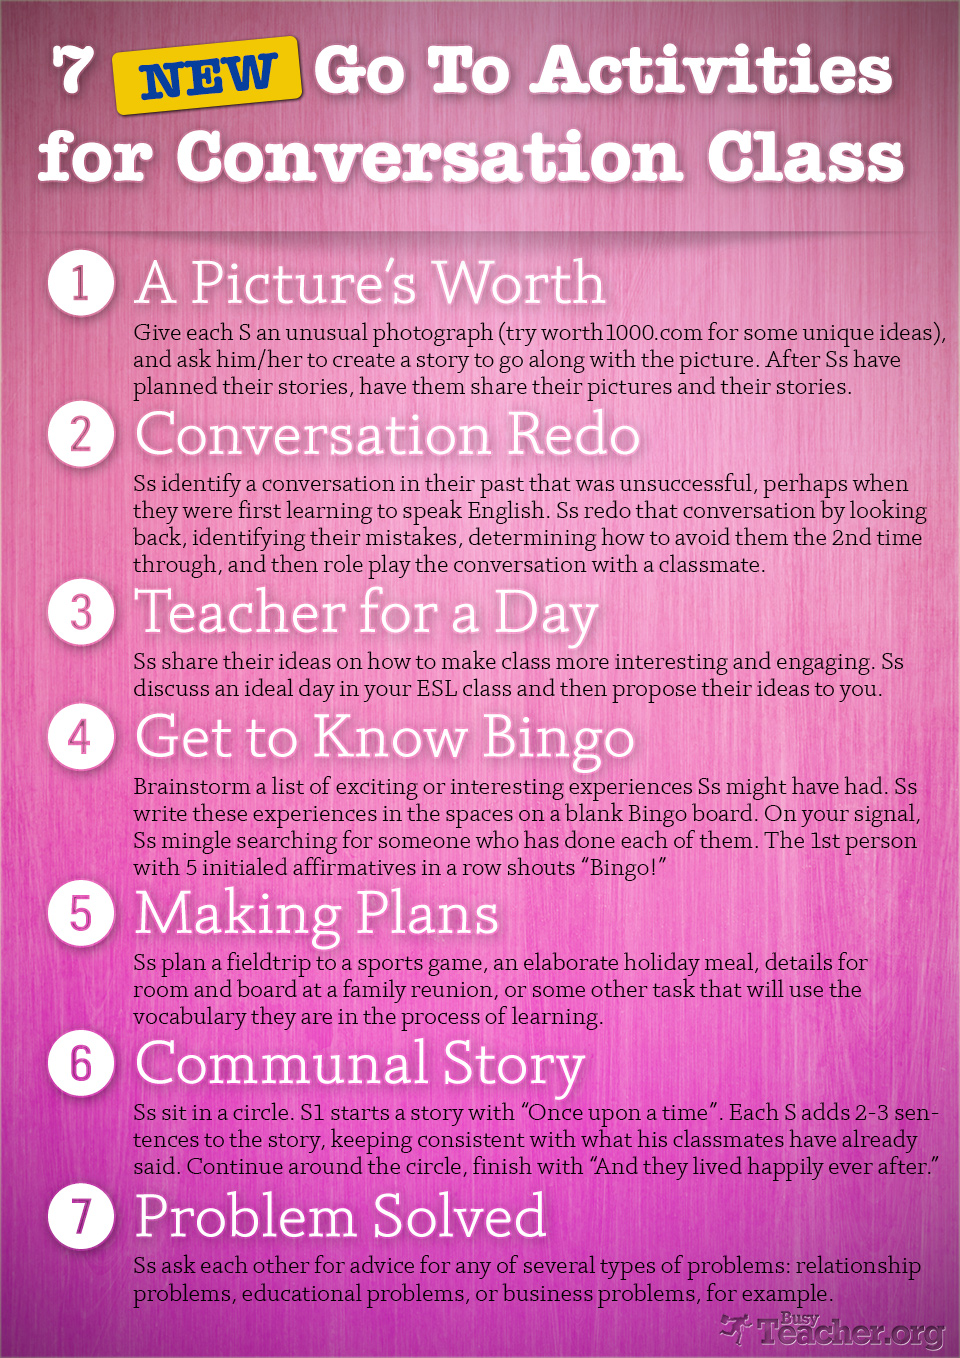 POSTER: 7 New Go To Activities for Conversation Class